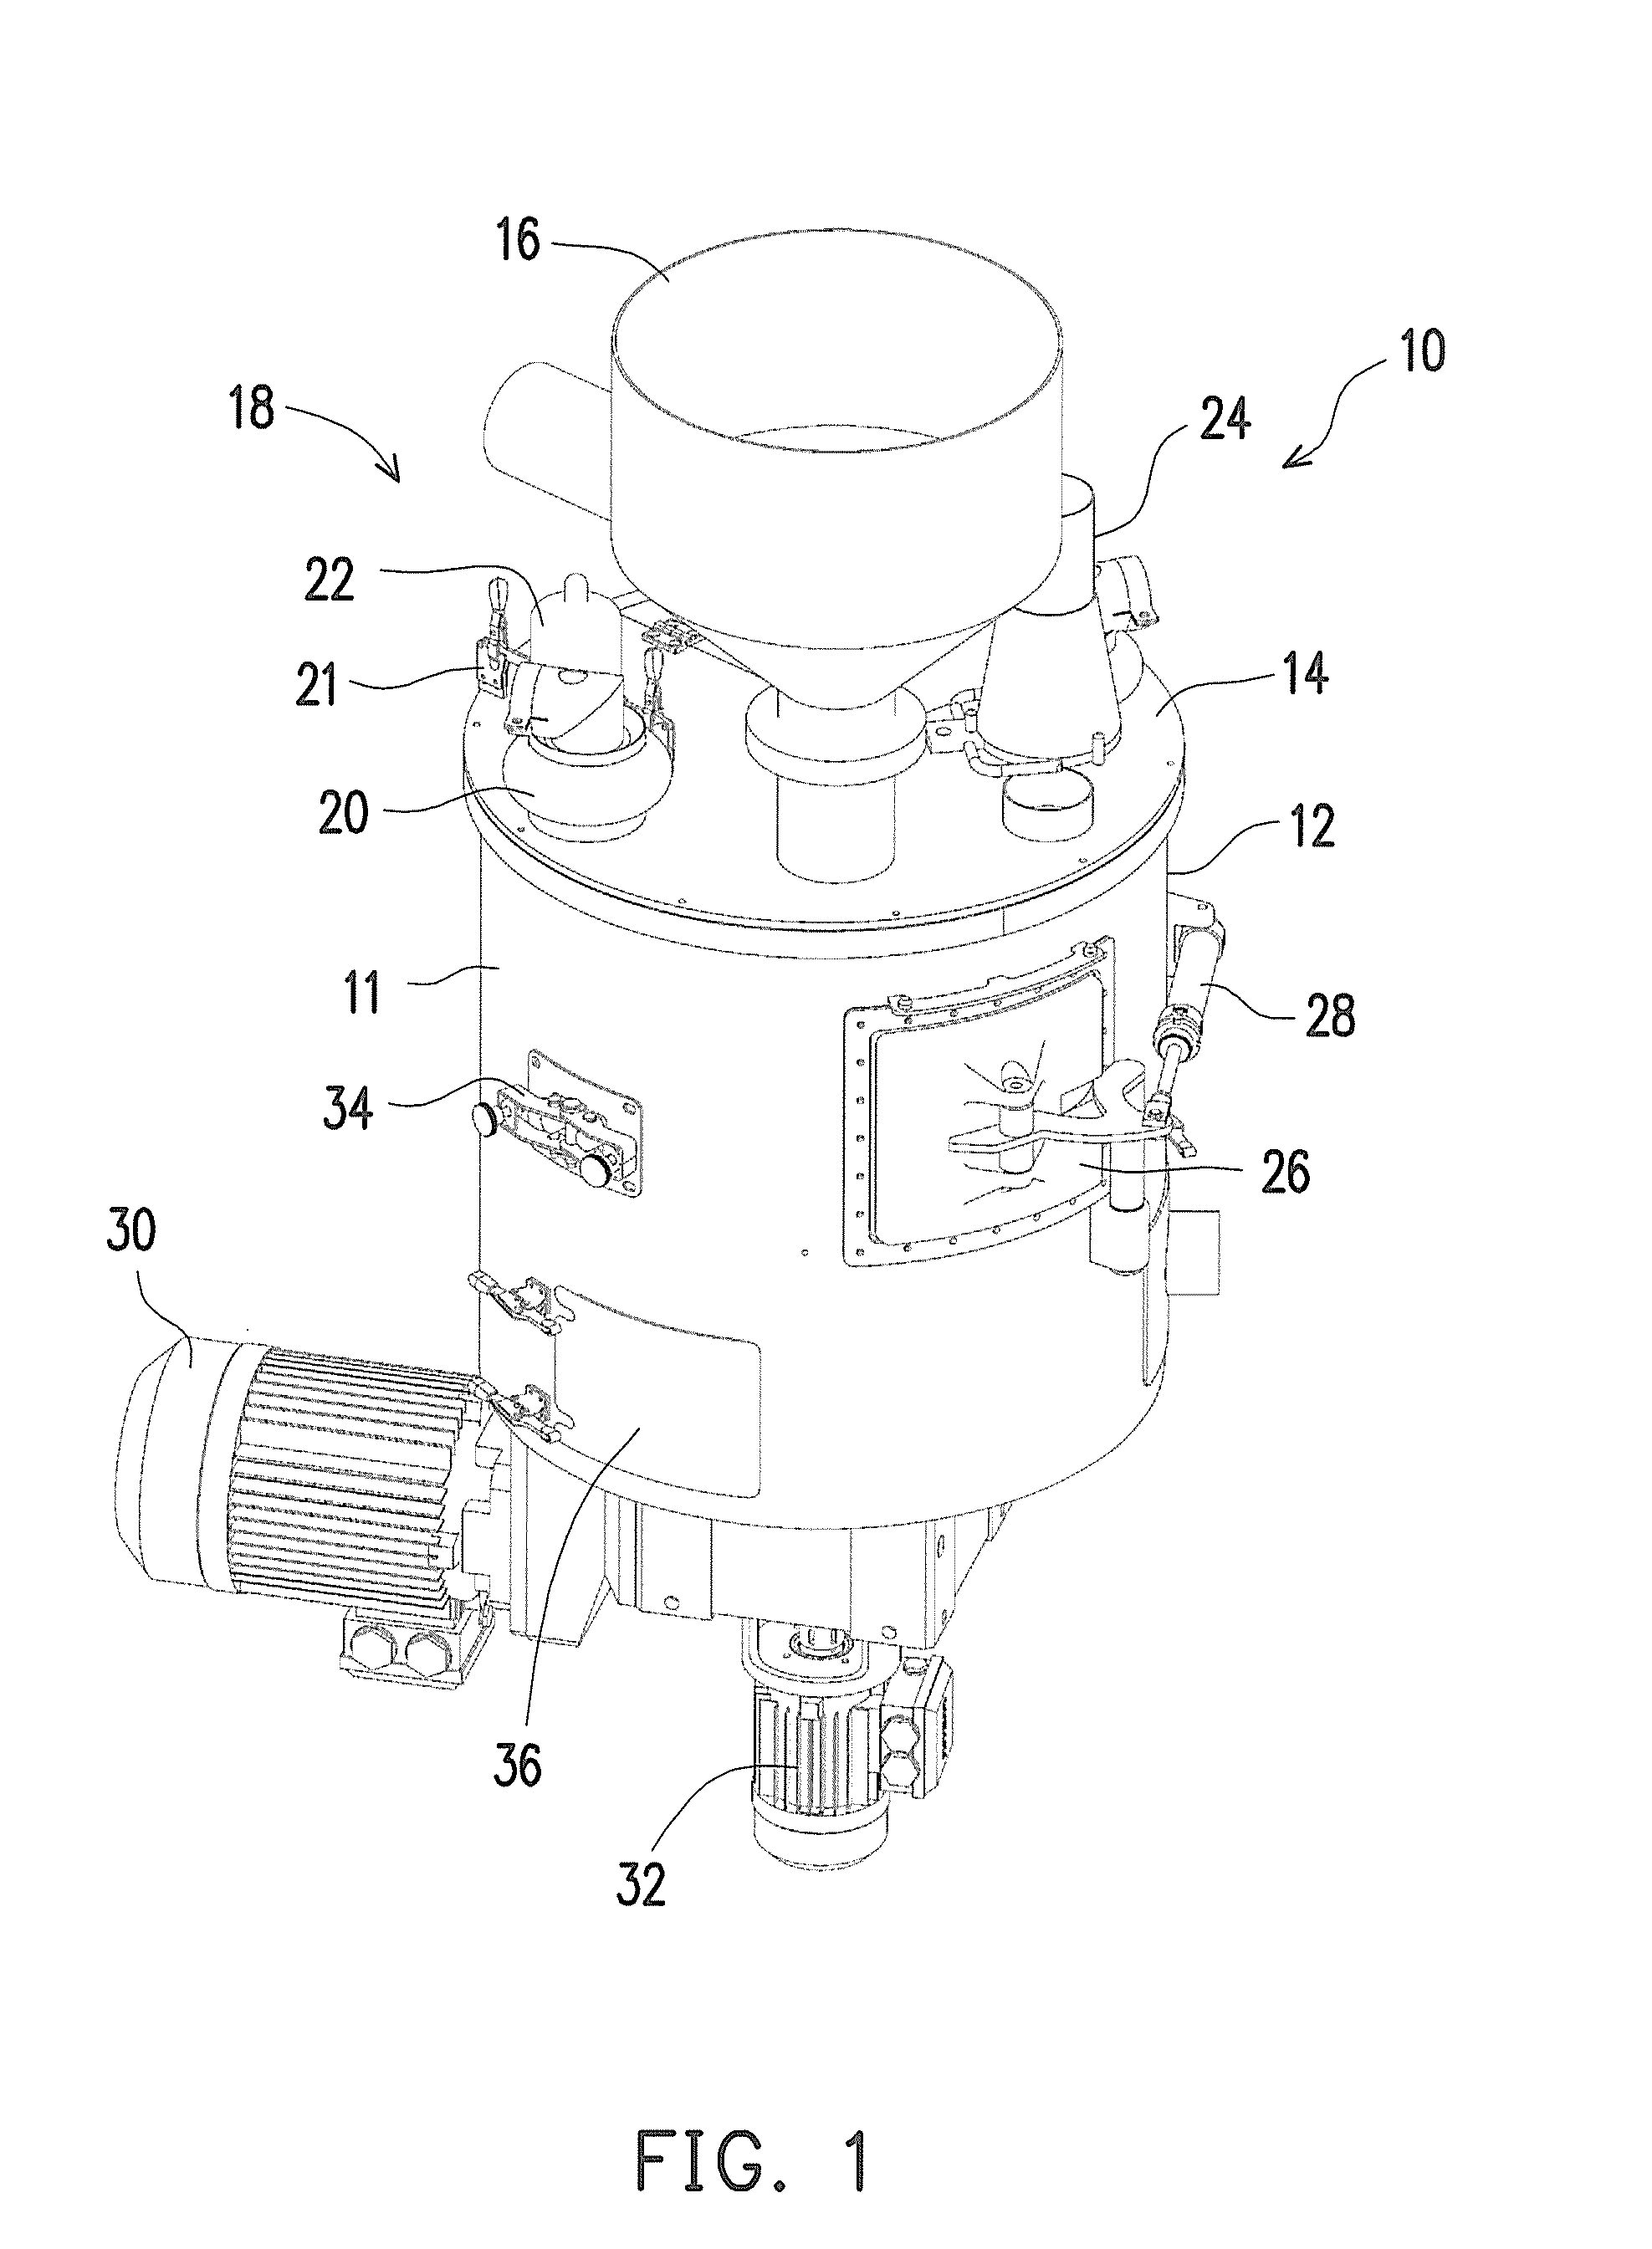 Method and device for coating or mixing granular products, more in particular peanuts, with a substance